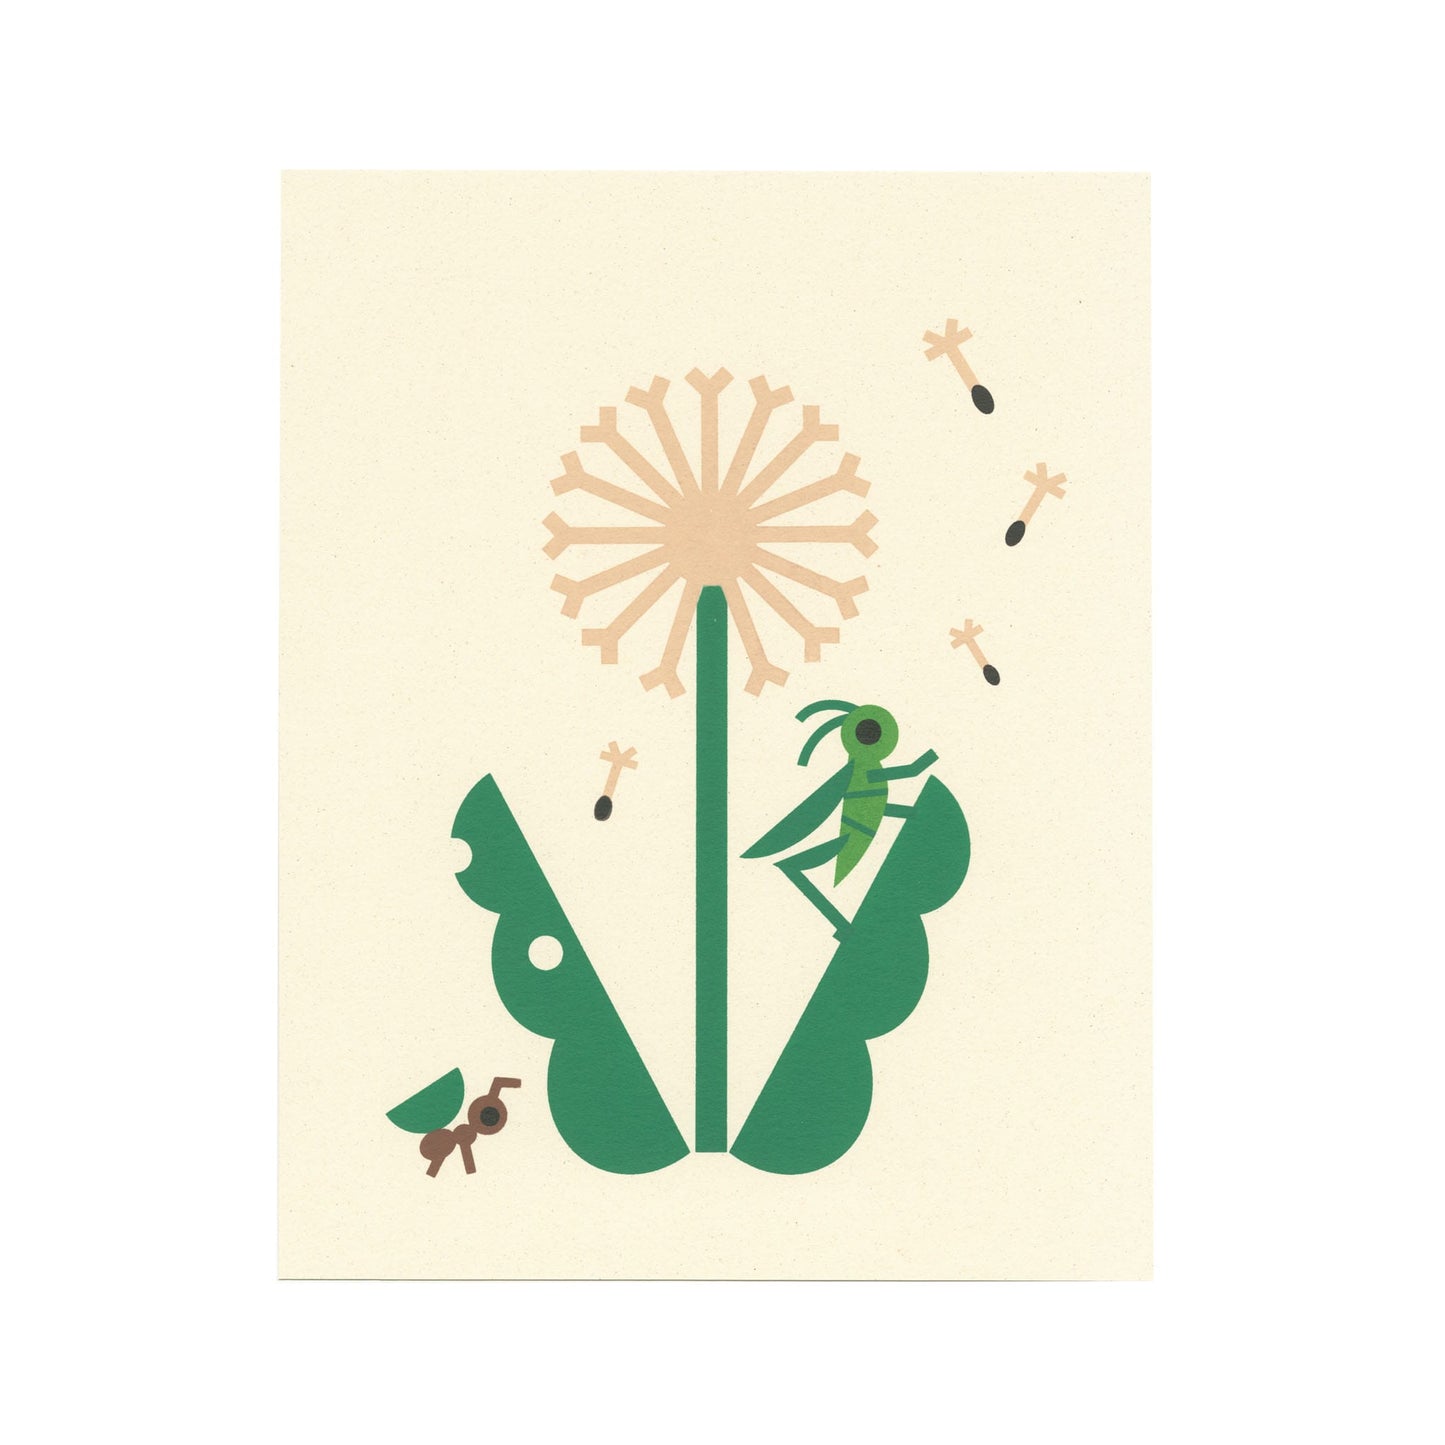 Art print featuring ant, cricket and dandelion illustration and signed pencil writing reads, 1/25 Harmony & Balance 2023.